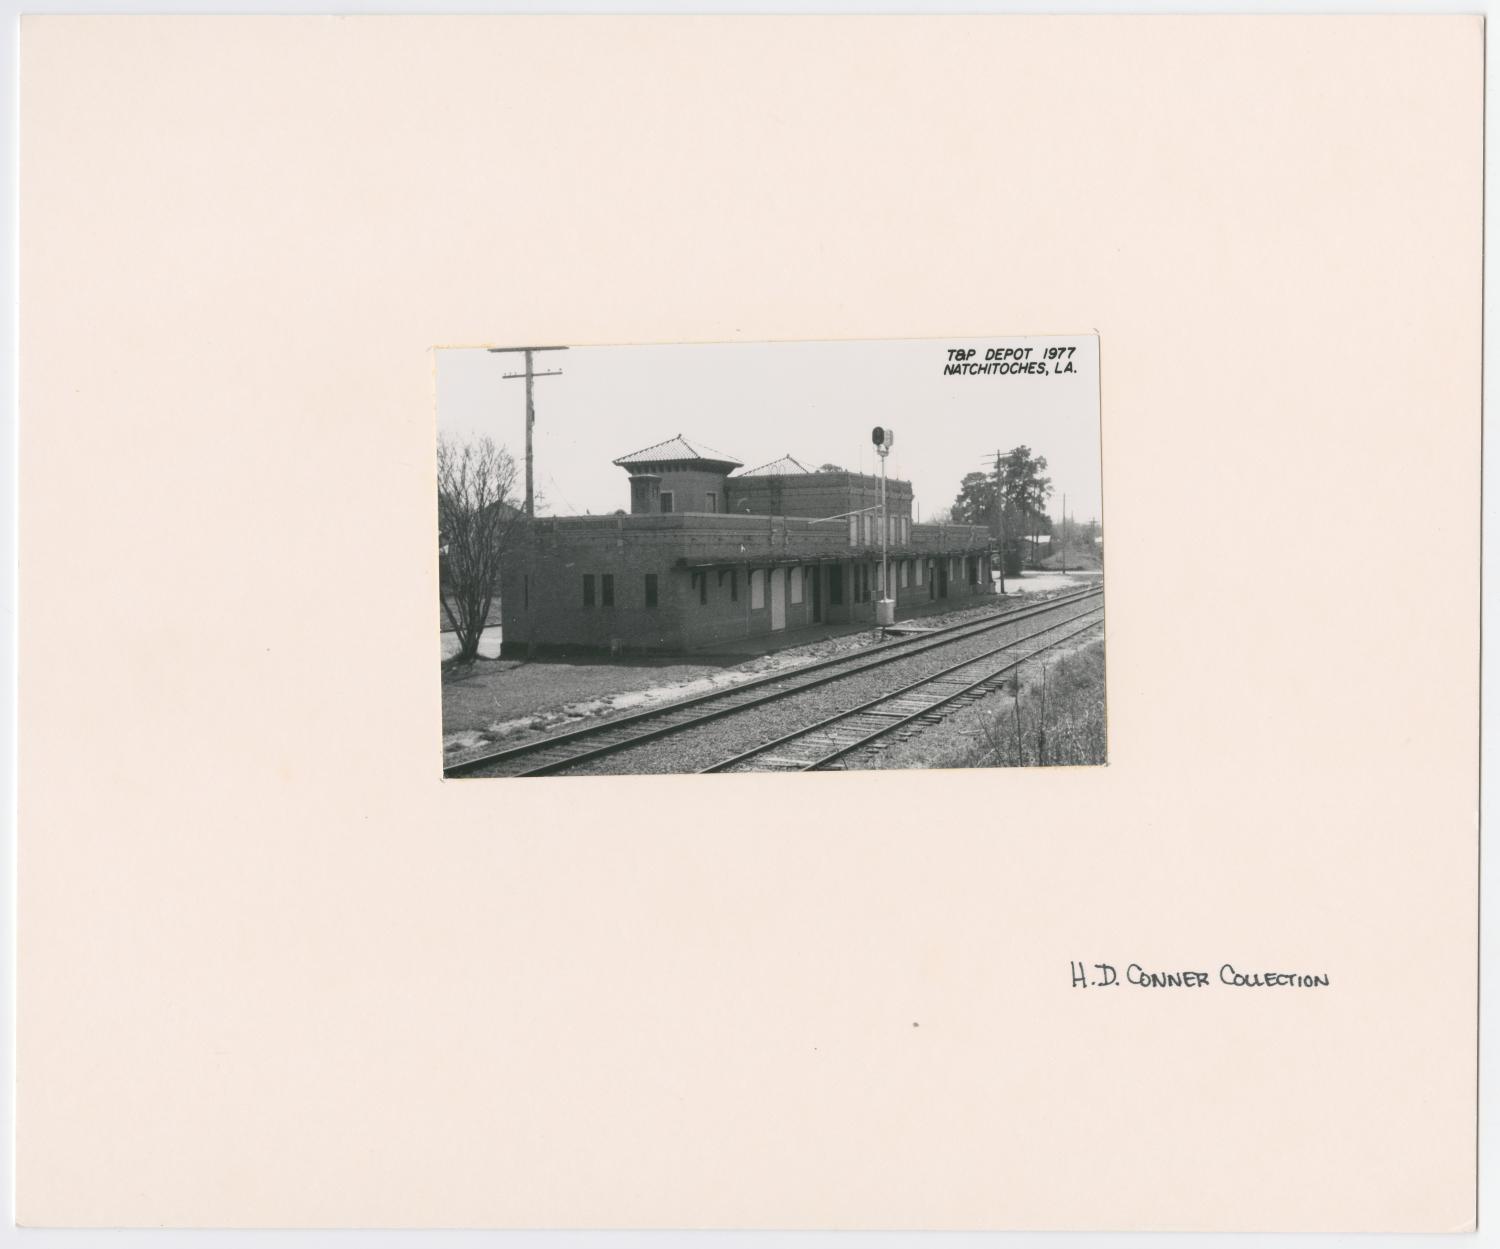 Images of Texas & Pacific Stations and Structures in Natchitoches, LA